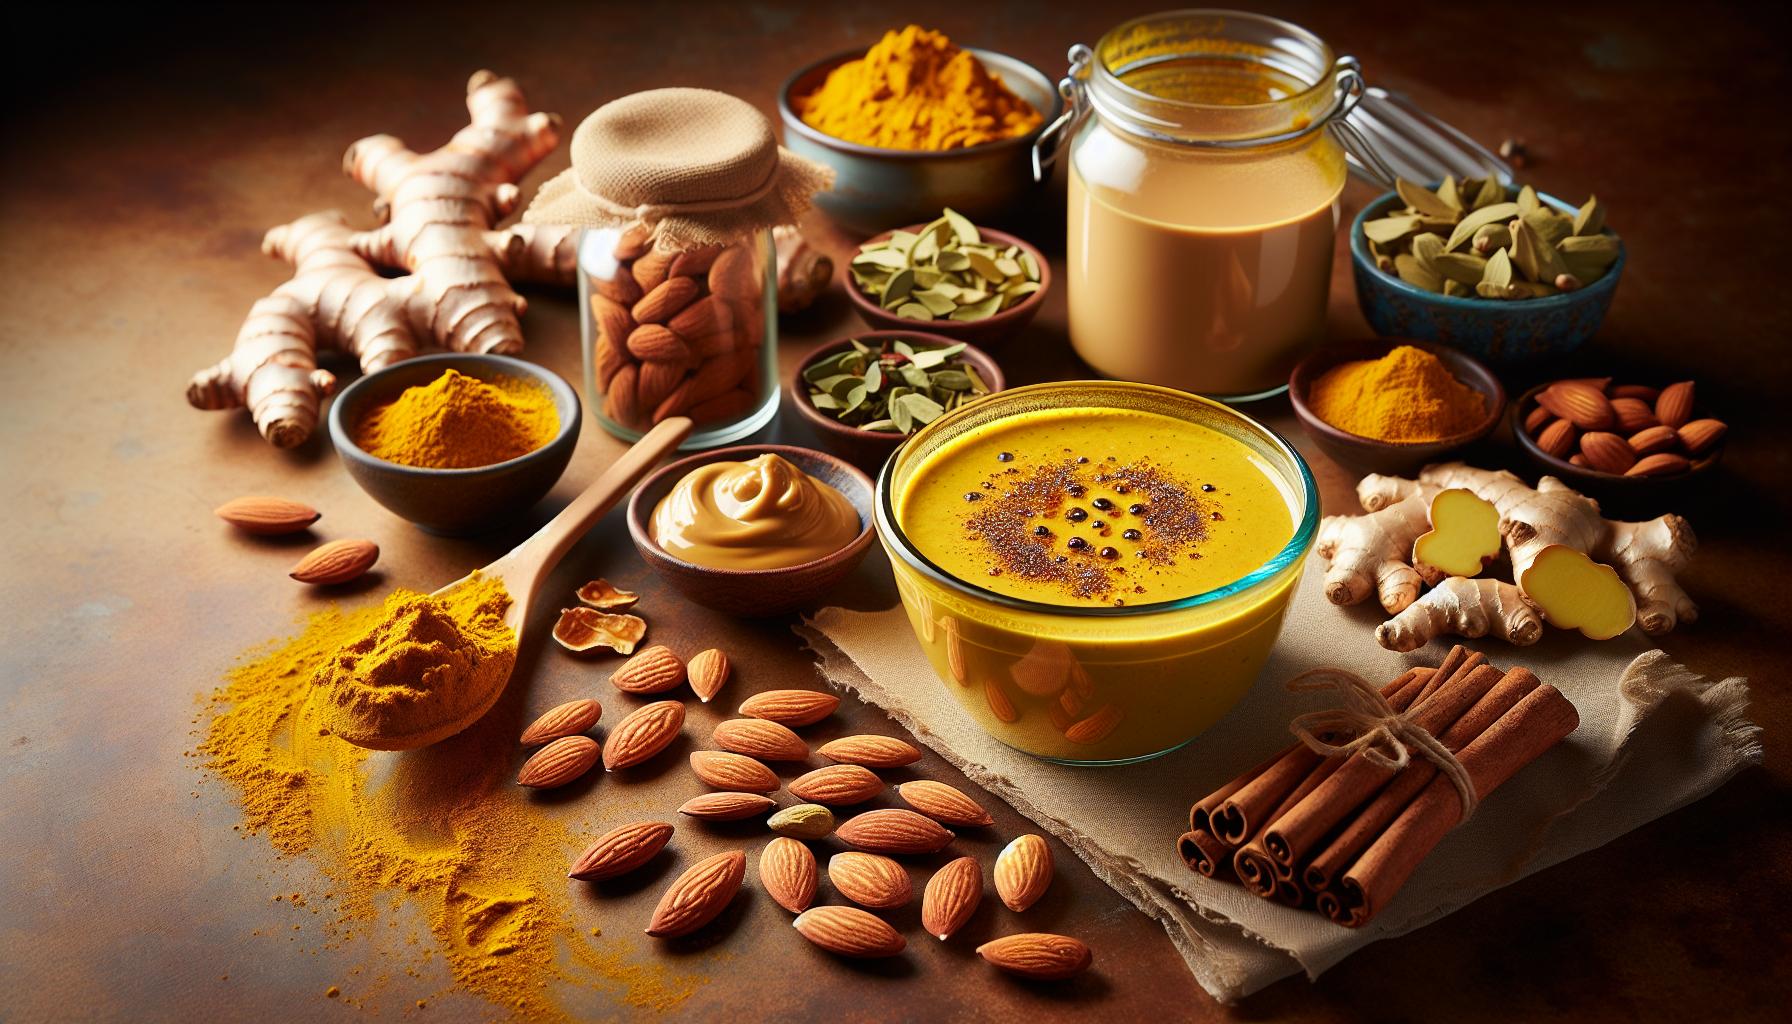 Unorthodox Ingredients: The Role of Almond Butter and Spices in Your Turmeric Latte